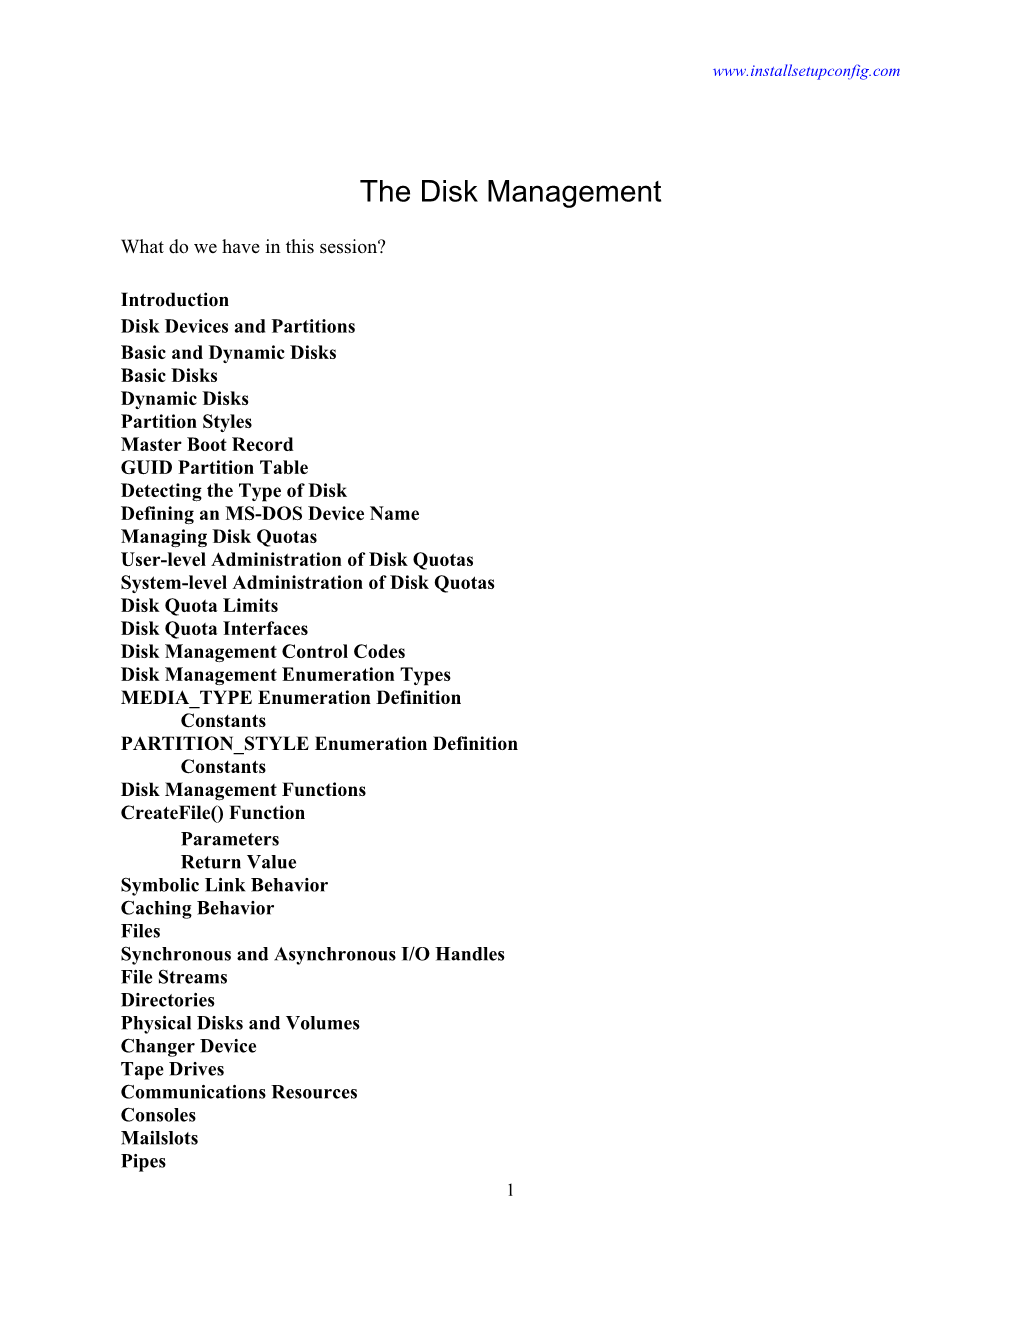 The Disk Management